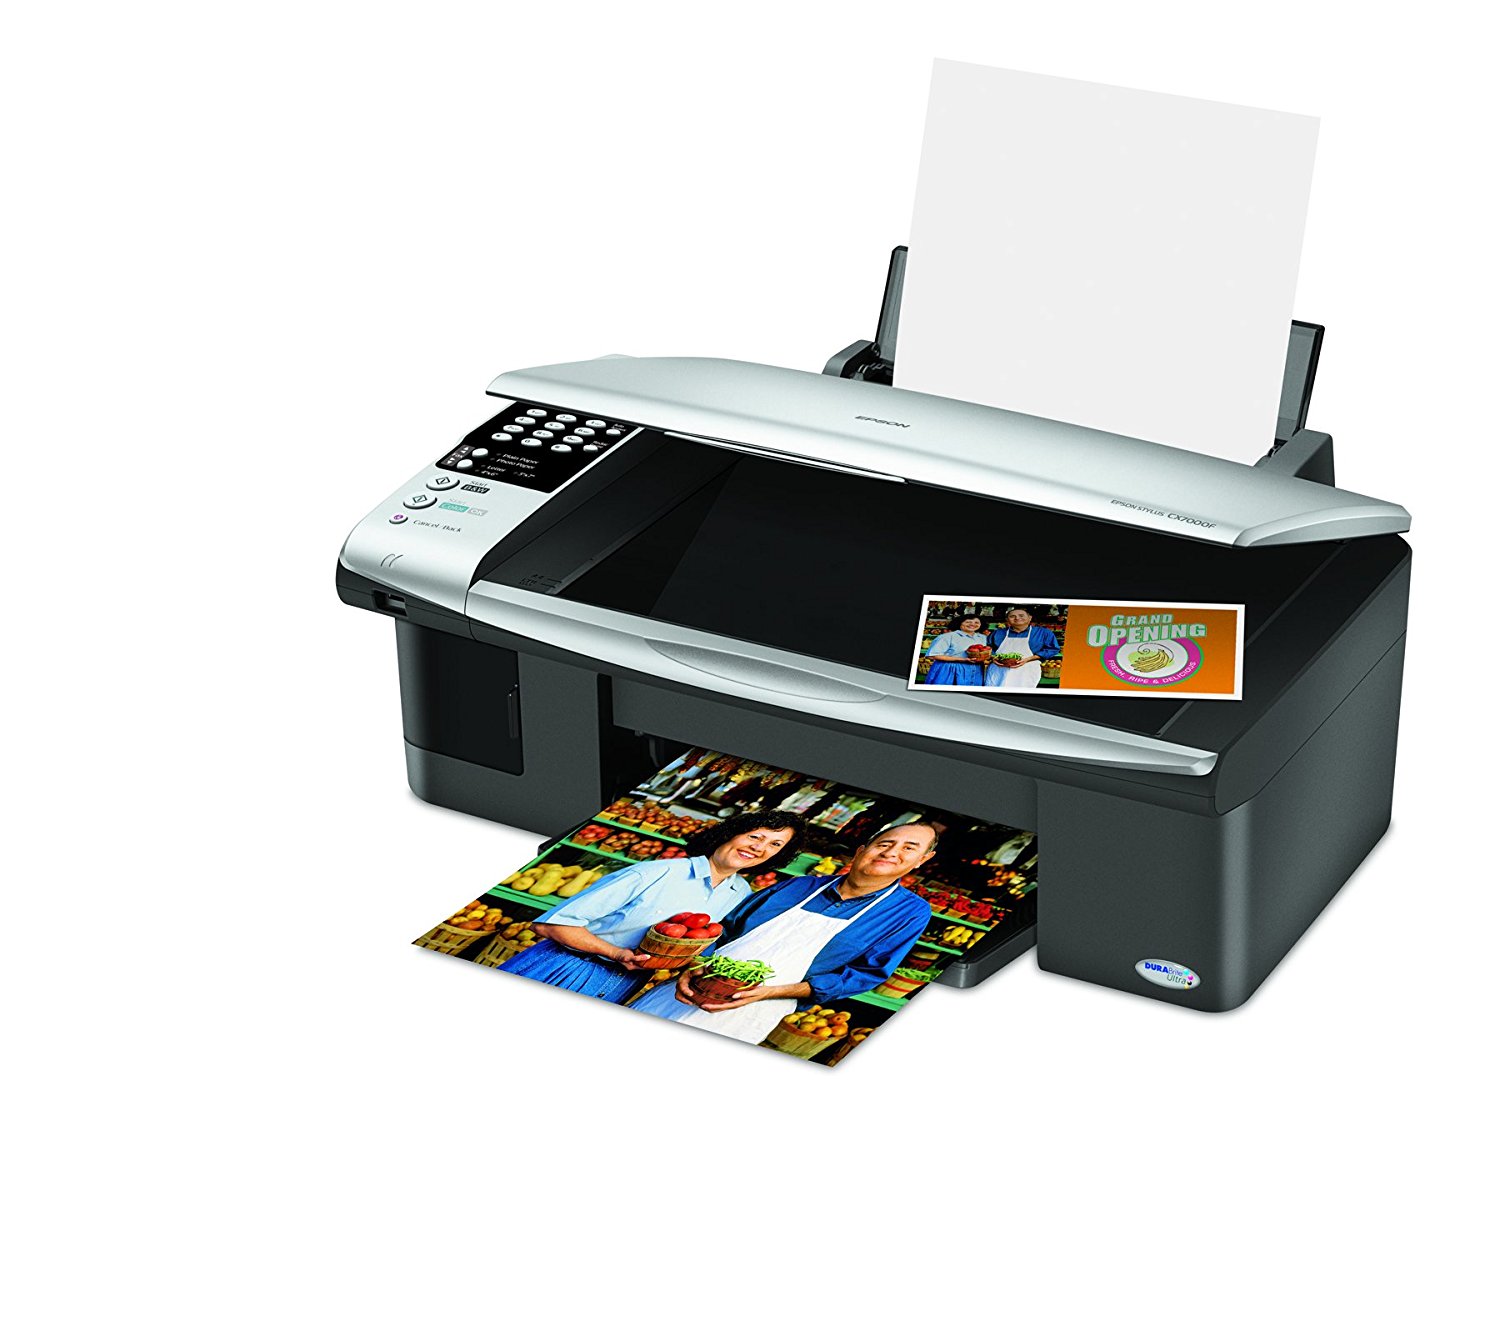 Epson Stylus Cx7000f All In One Printer C11c676001 Free Image Download 0263